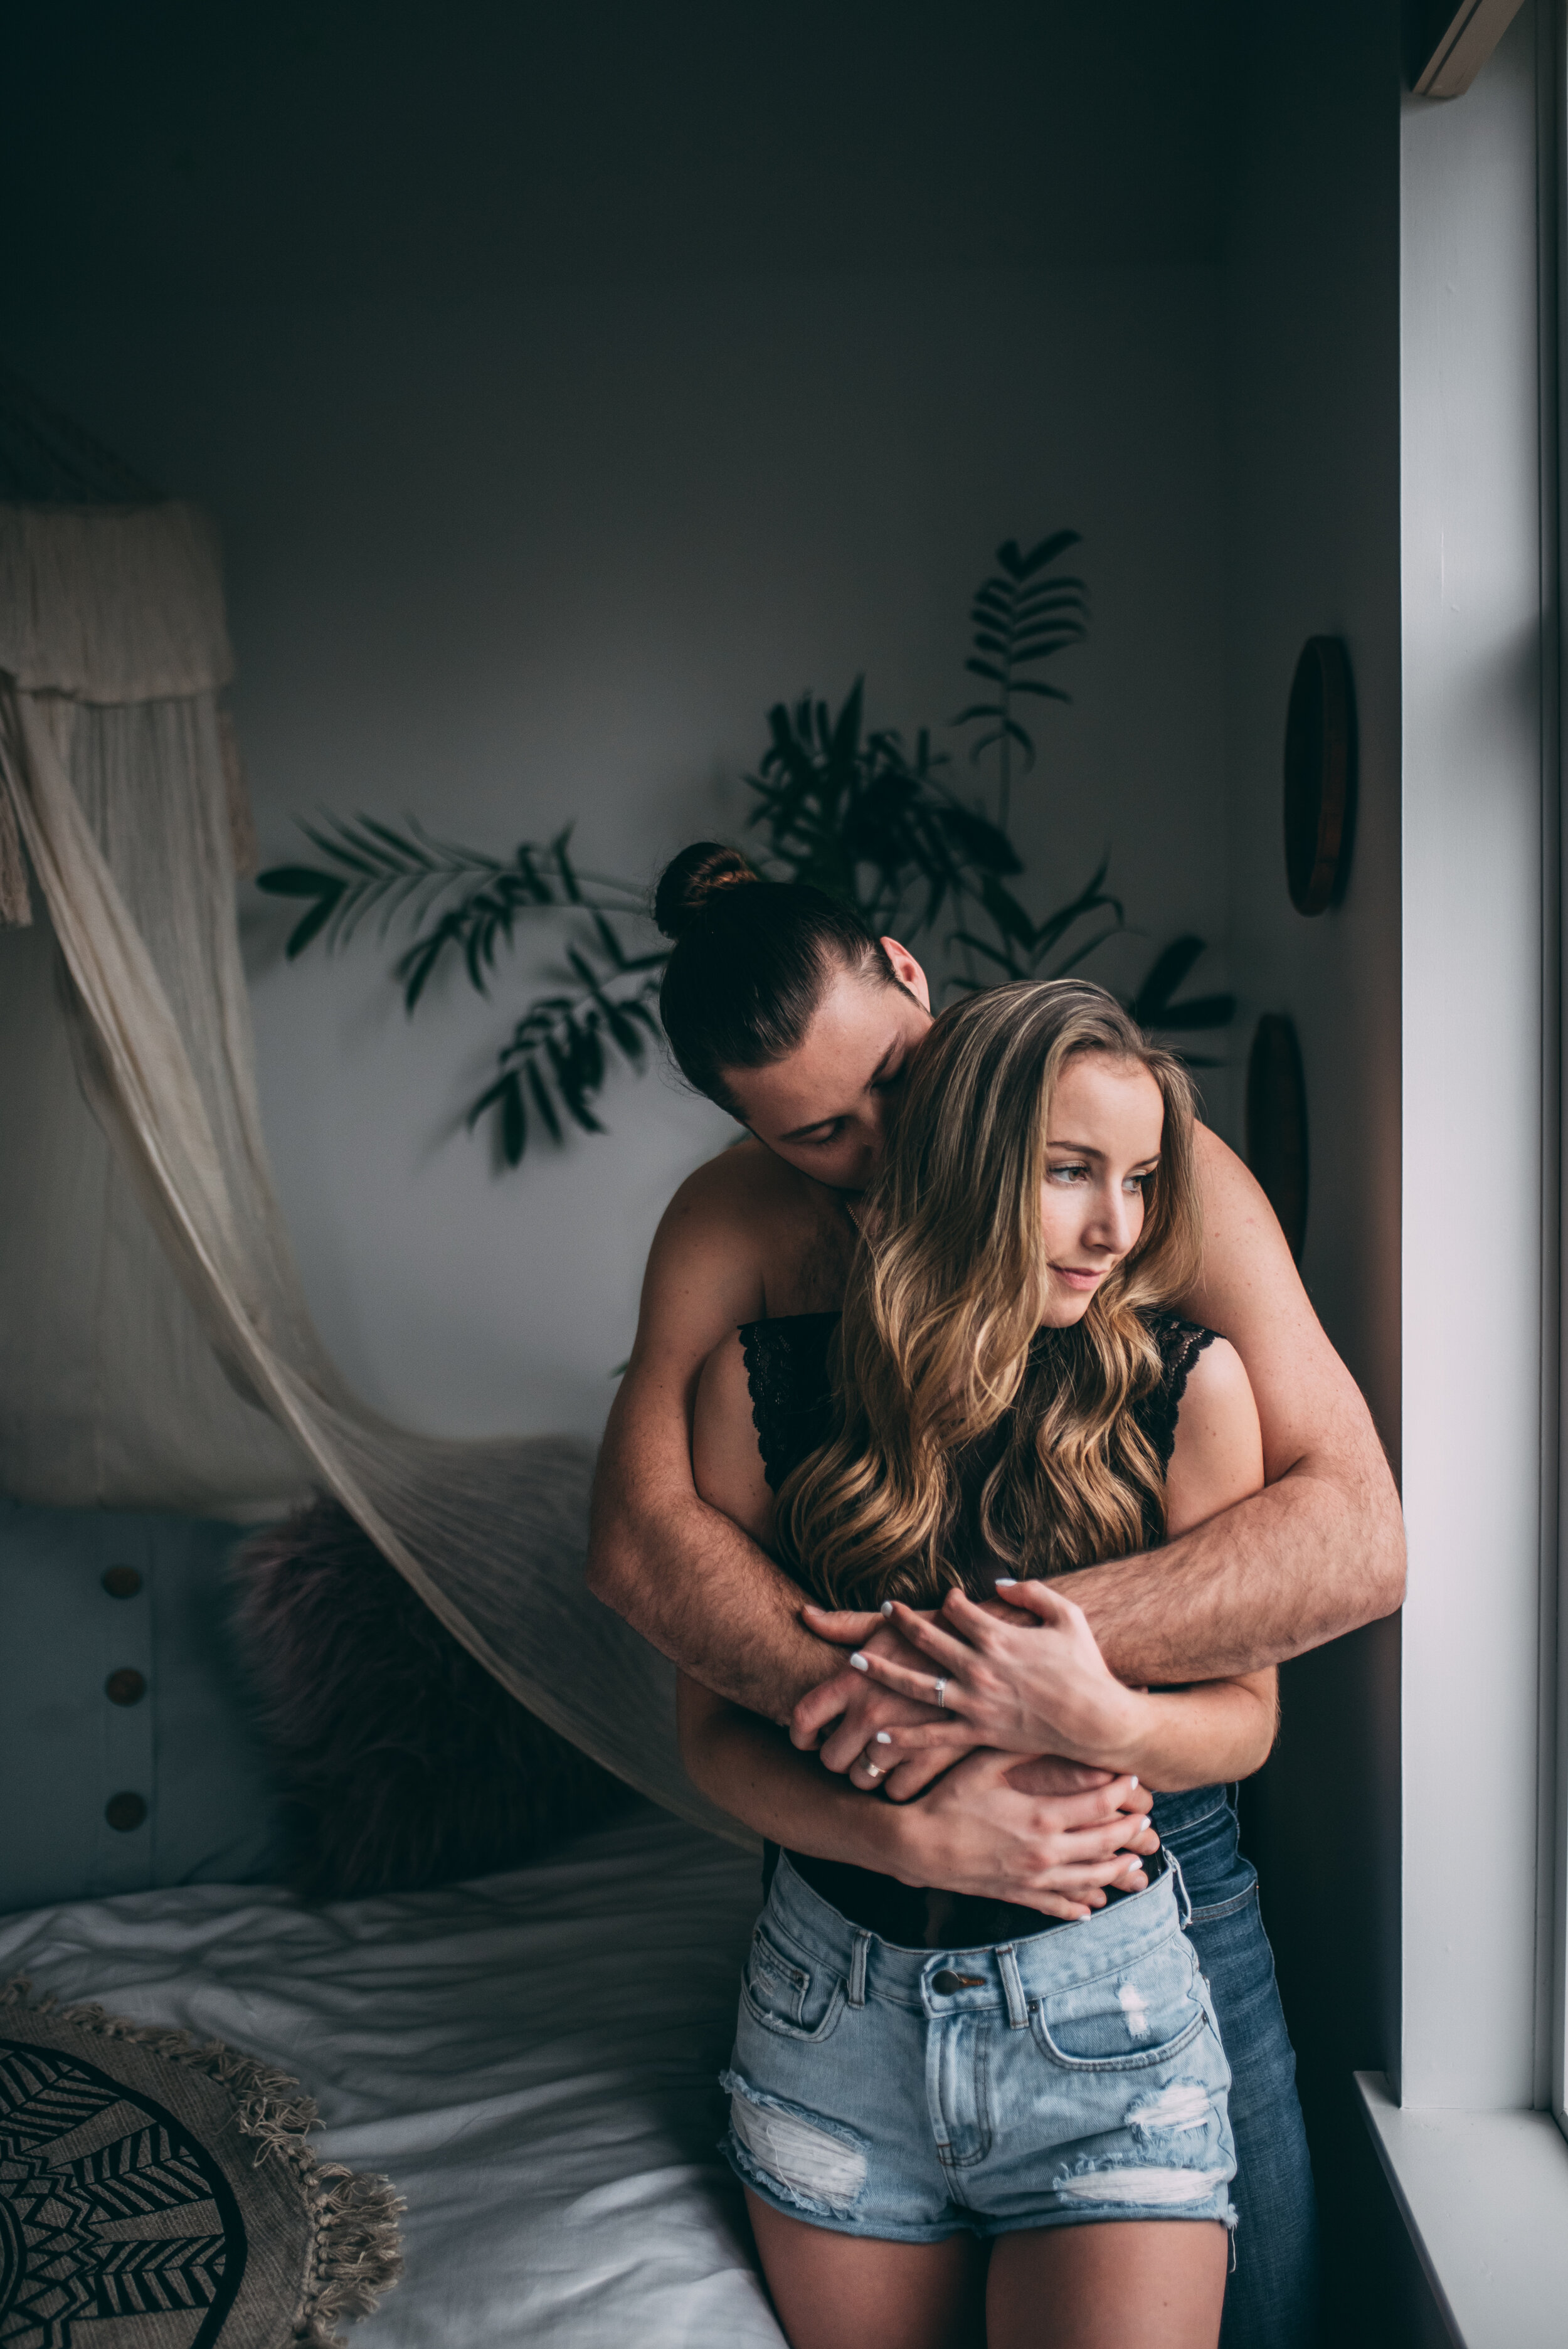 Sechelt BC Engagement Session - In Home Couples Session - Laura Olson Photography - Sunshine Coast BC & Vancouver Wedding & Elopement Photographer-5265.jpg